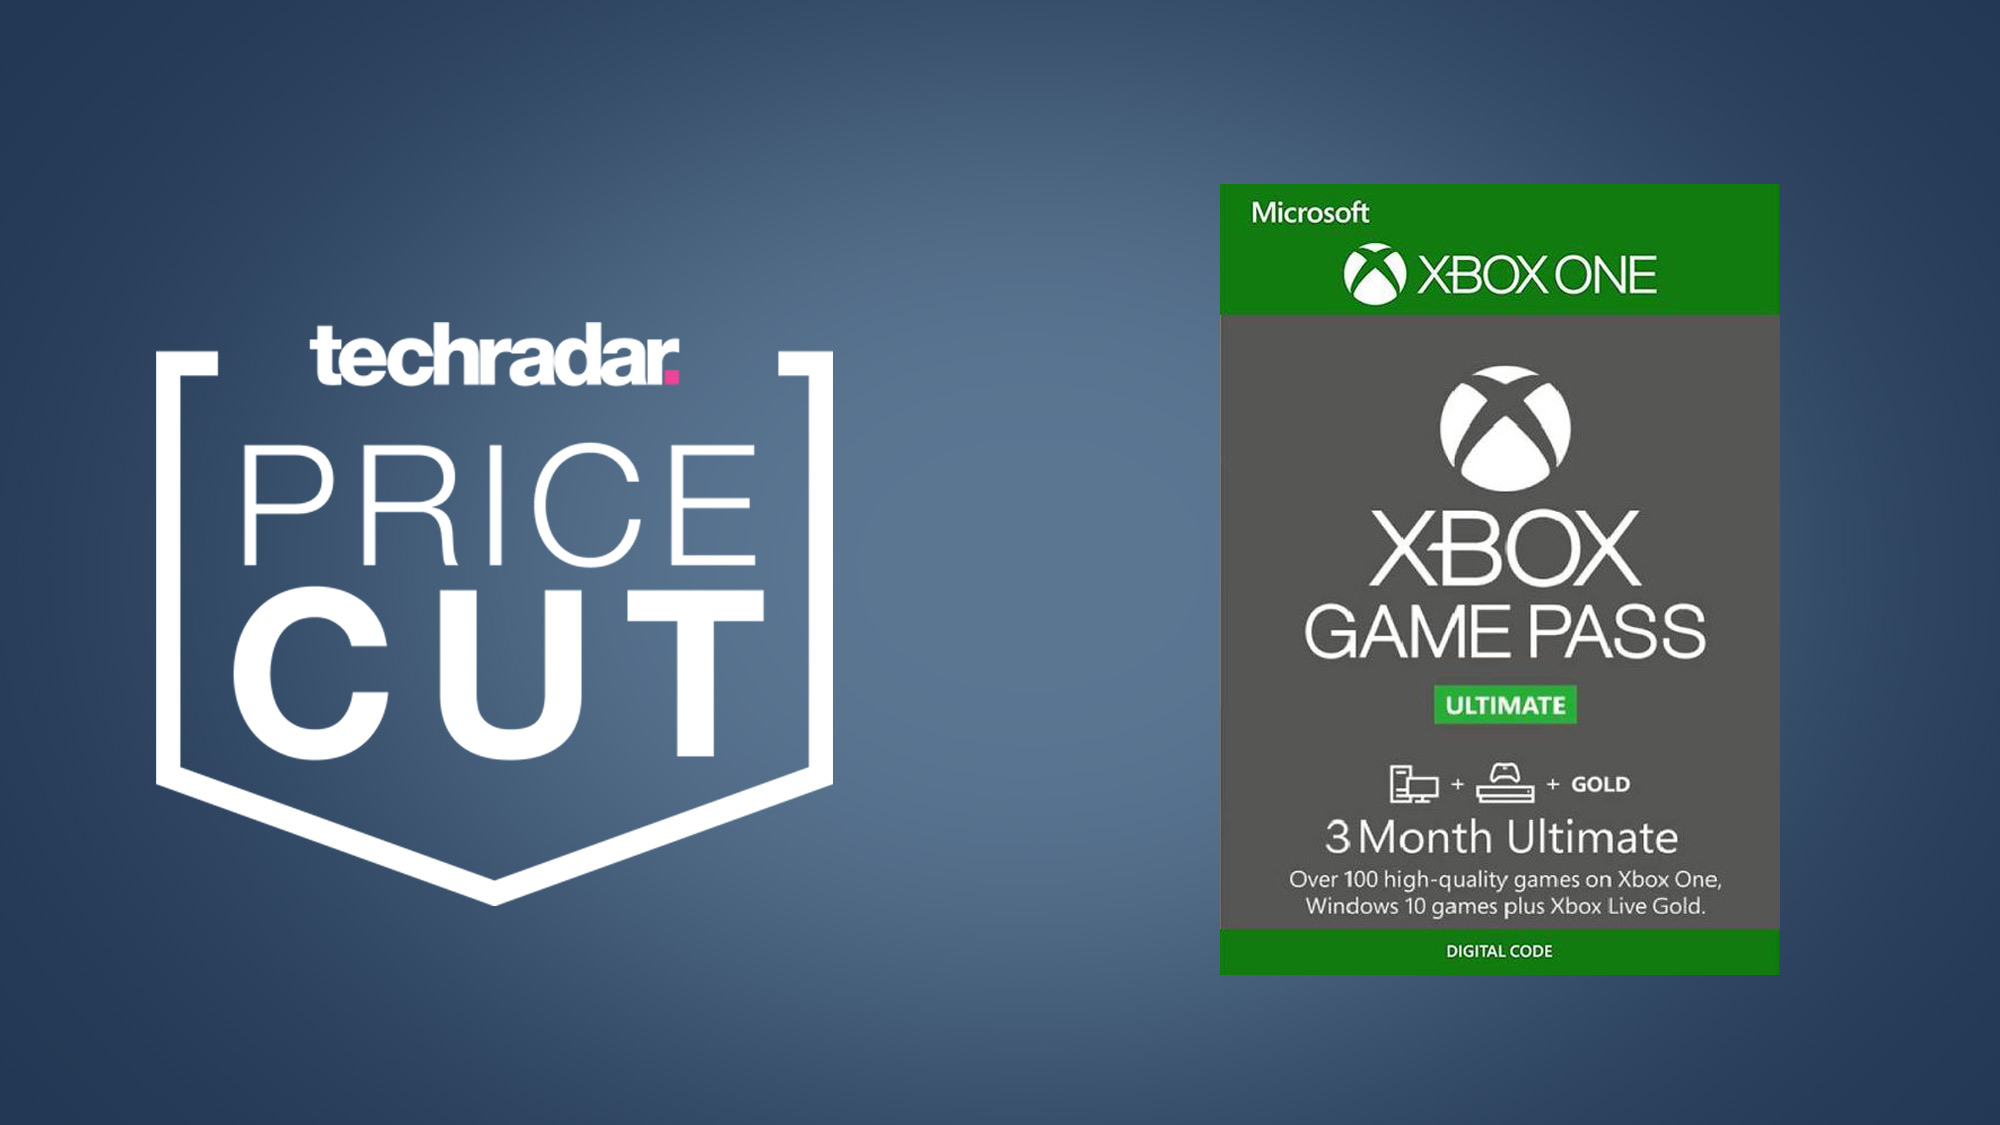 Game Pass Ultimate 3 Months For XBox Live (Digital Code